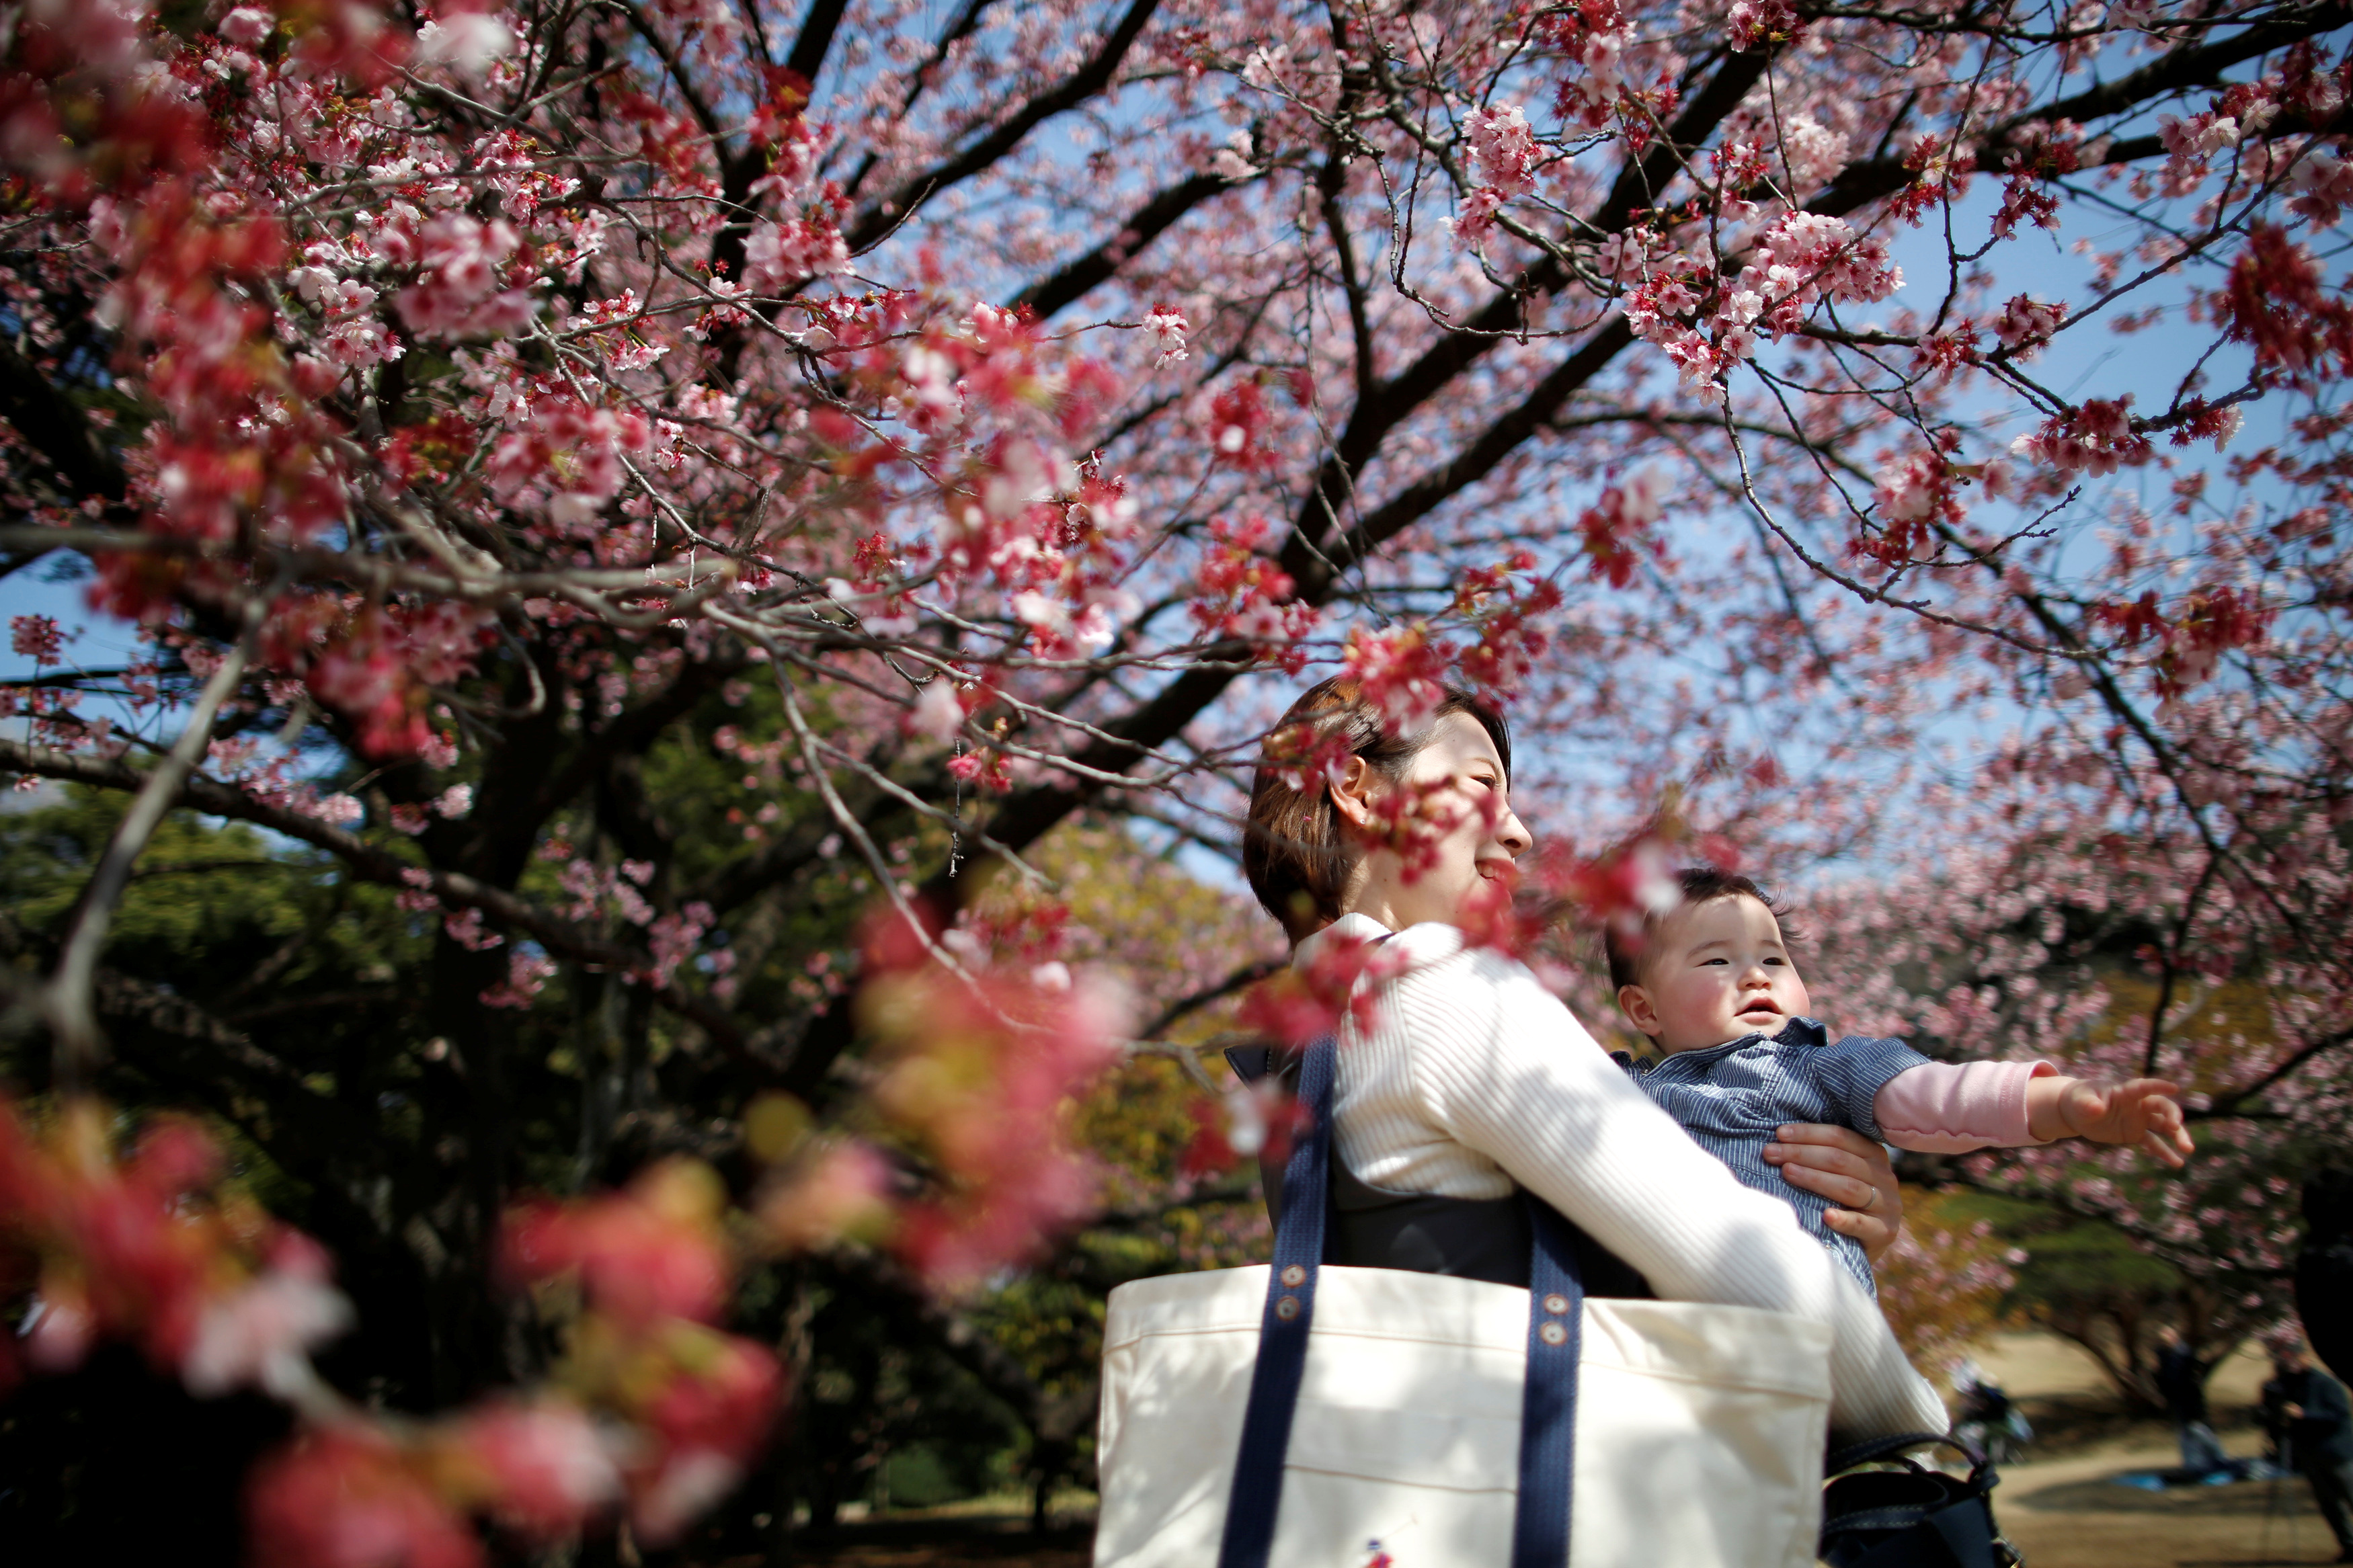 A seven-month-old baby and her mother look at early flowering Kanzakura cherry blossoms in full bloom at the Shinjuku Gyoen National Garden in Tokyo